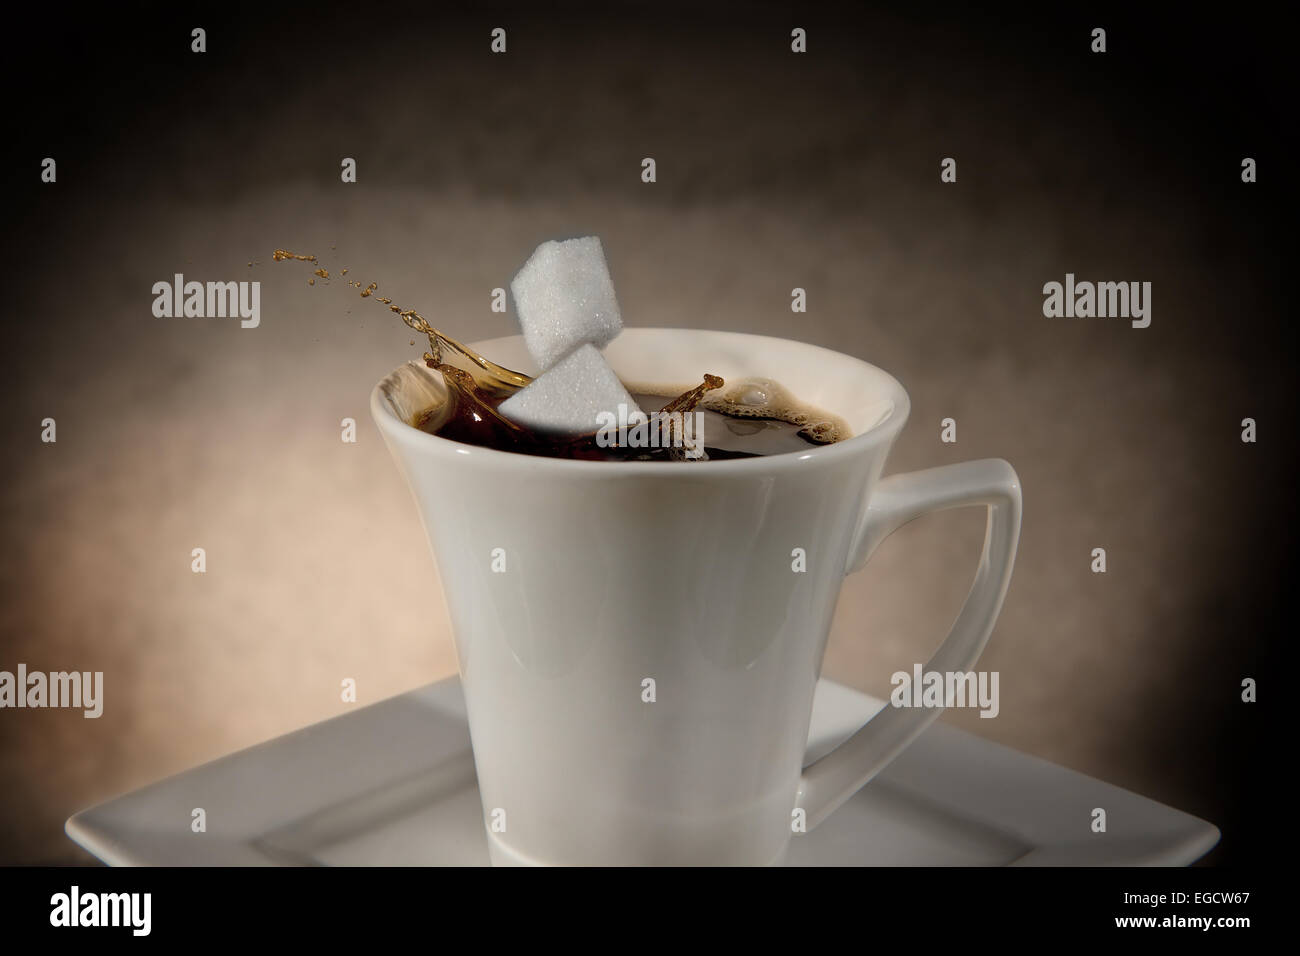 Two sugar cubes falling into a cup of coffee, splashing coffee Stock Photo